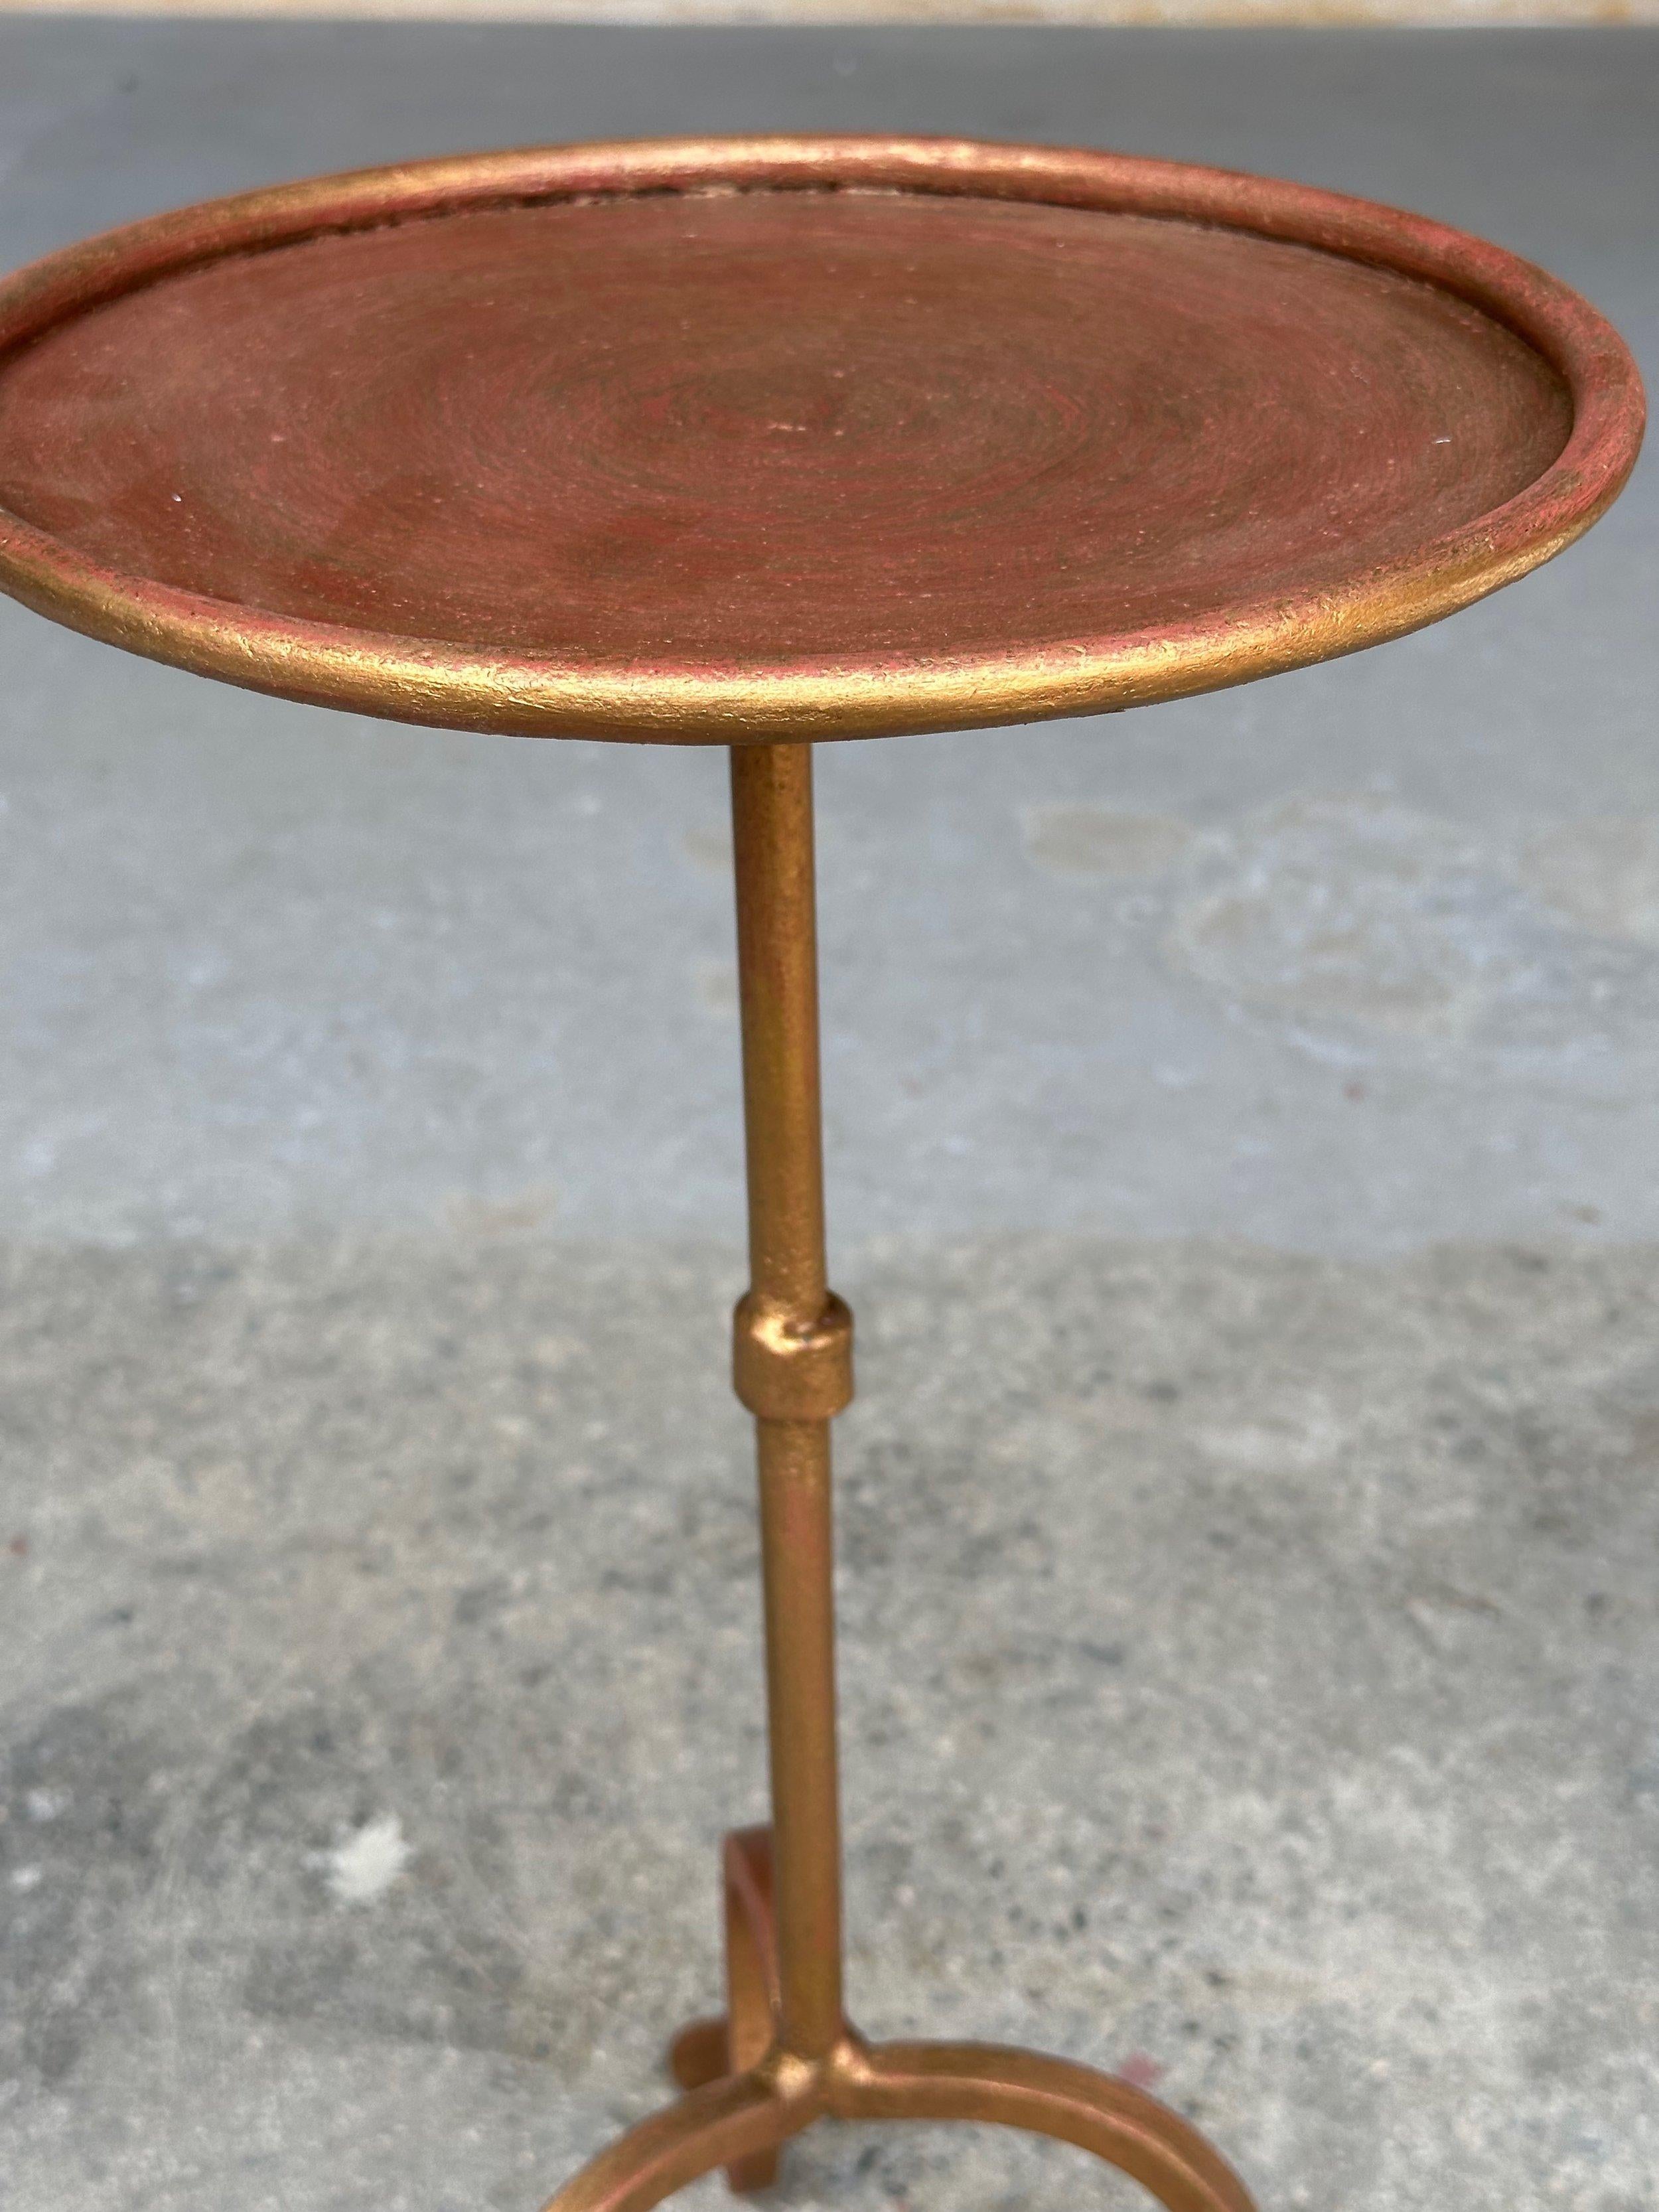 Contemporary Small Spanish Gilt Iron Drinks Table with Curved Legs For Sale